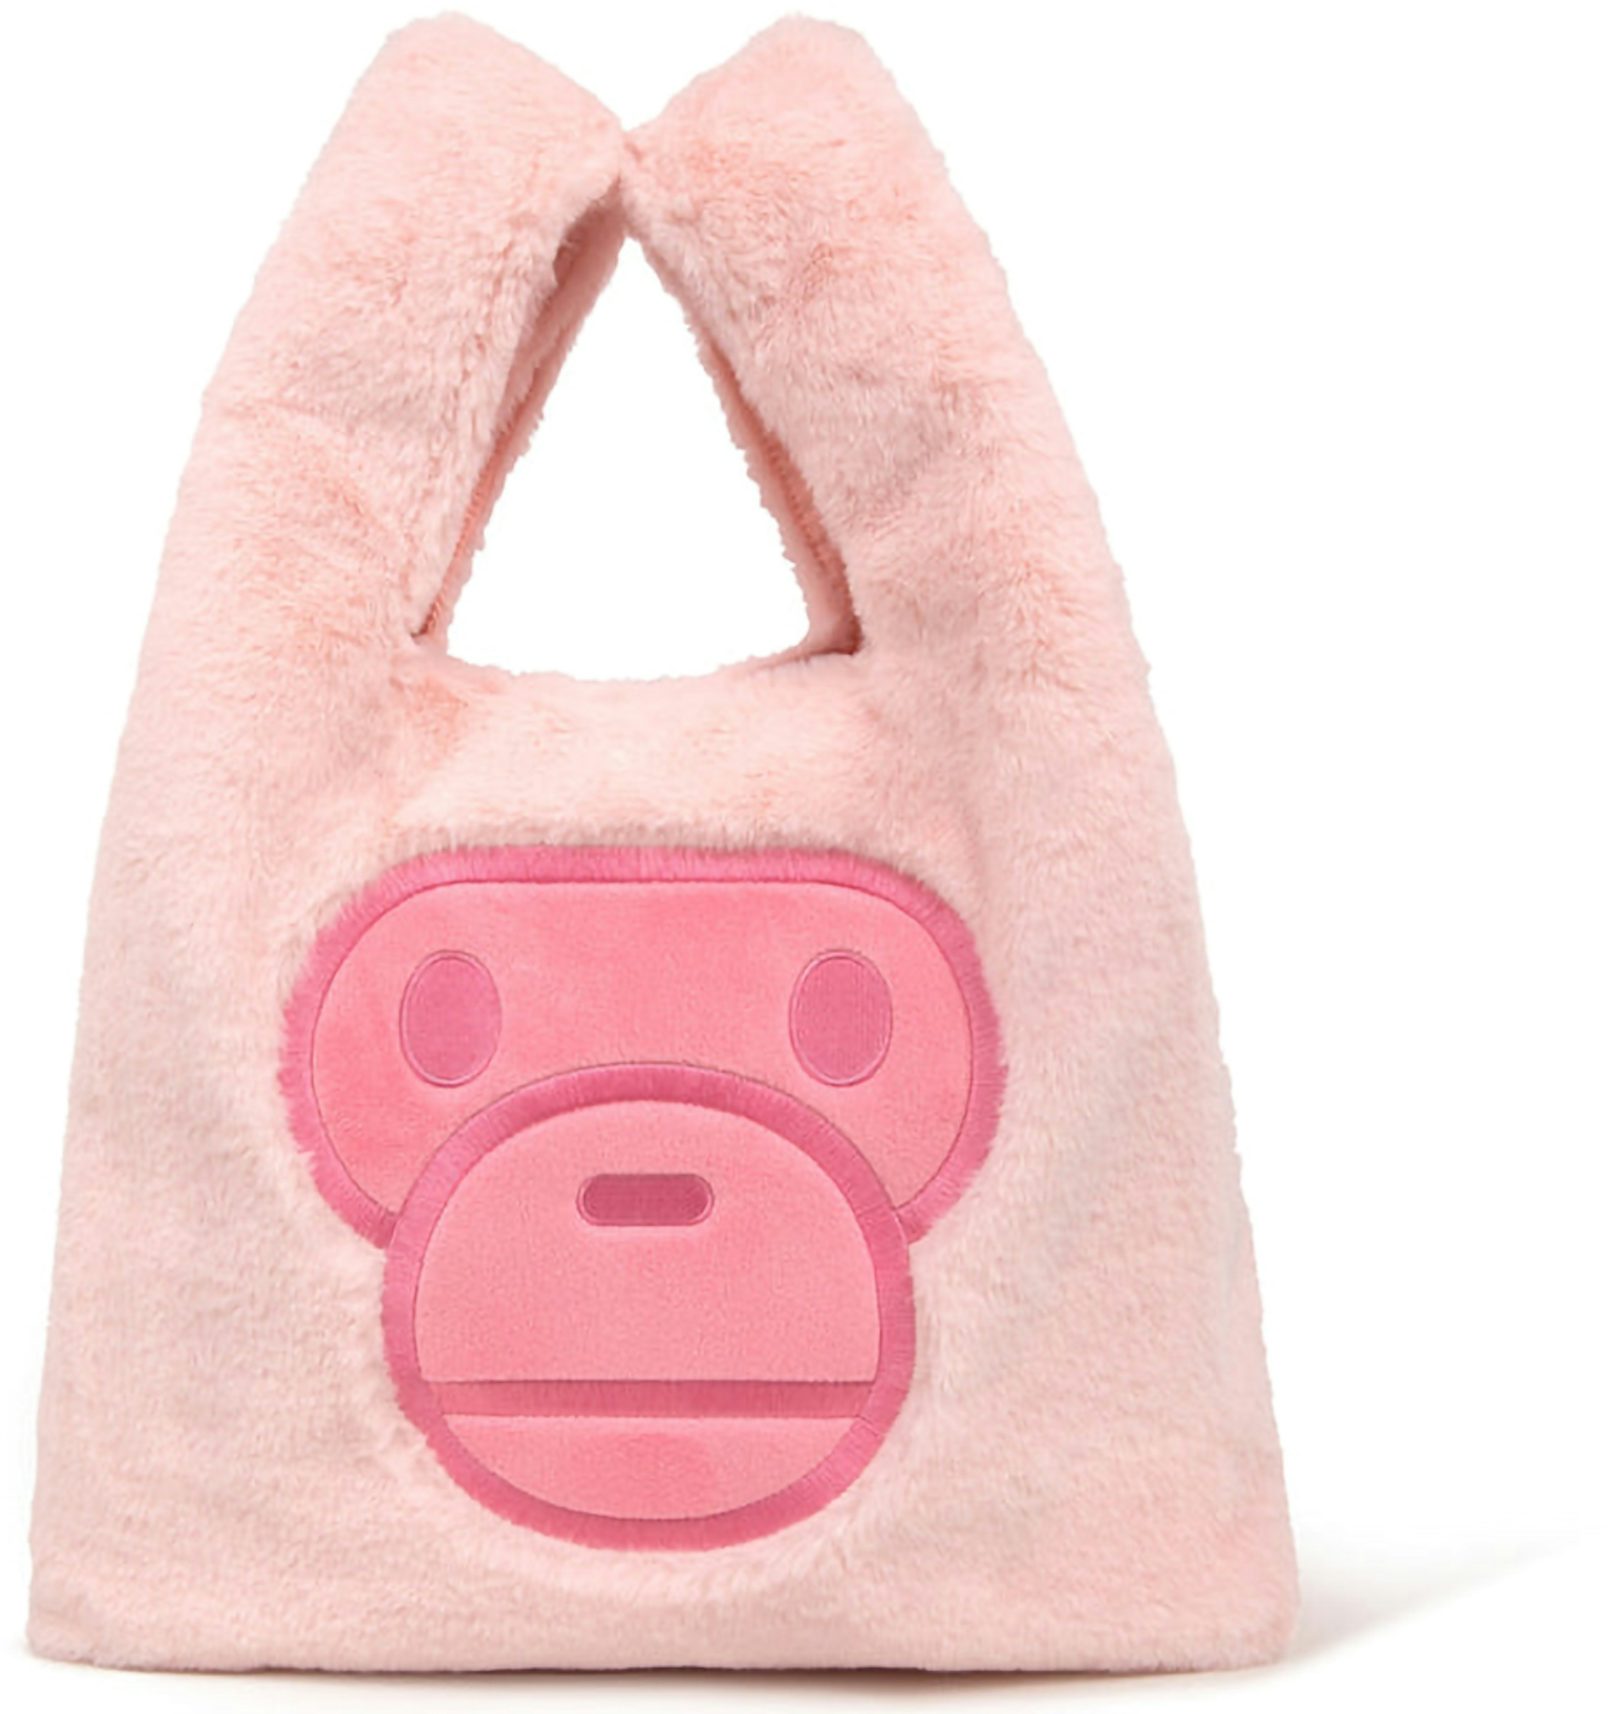 A BATHING APE HAPPY NEW YEAR BACKPACK Bag Baby Milo Women XS Pink